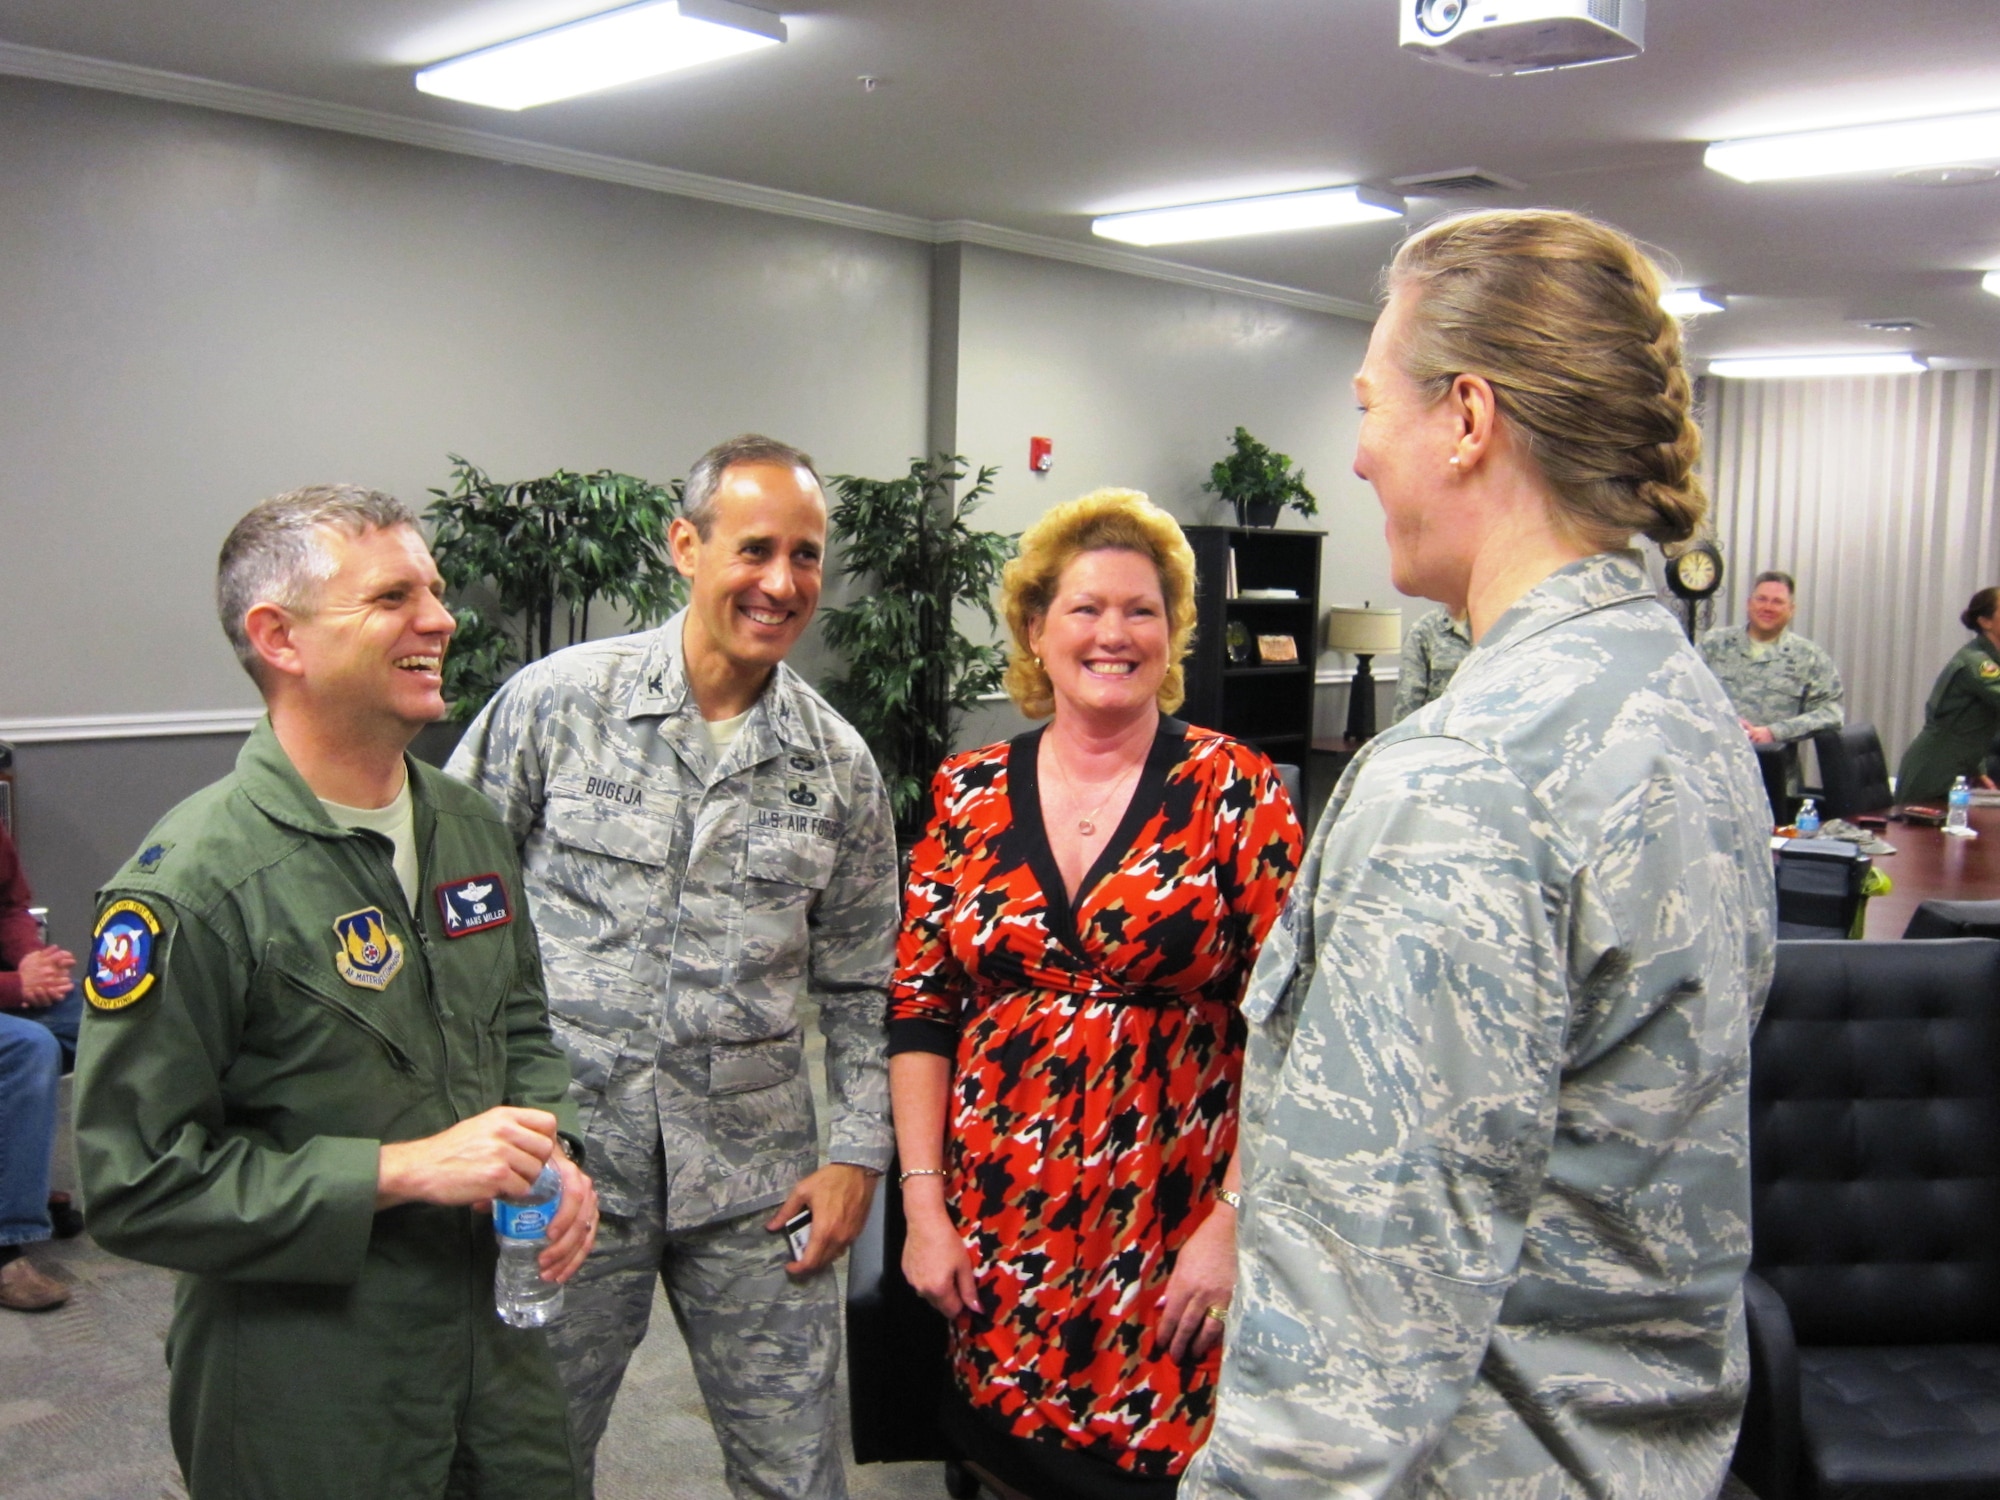 Lt. Col. Hans Miller, Air War College student; Col. Vince Bugeja, Reserve adviser to the commander of the Carl A. Spaatz Center for Officer Education; and Lt. Col. Joyce Guthrie, Public Affairs Center of Excellence, share a laugh with Brig. Gen. Jocelyn Seng, mobilization assistant to the commander and president of the Air University, following the general’s GARNET talk at the Air War College in April at Maxwell Air Force Base, Ala. (U.S. Air Force photo by Lt. Col. Patricia York)